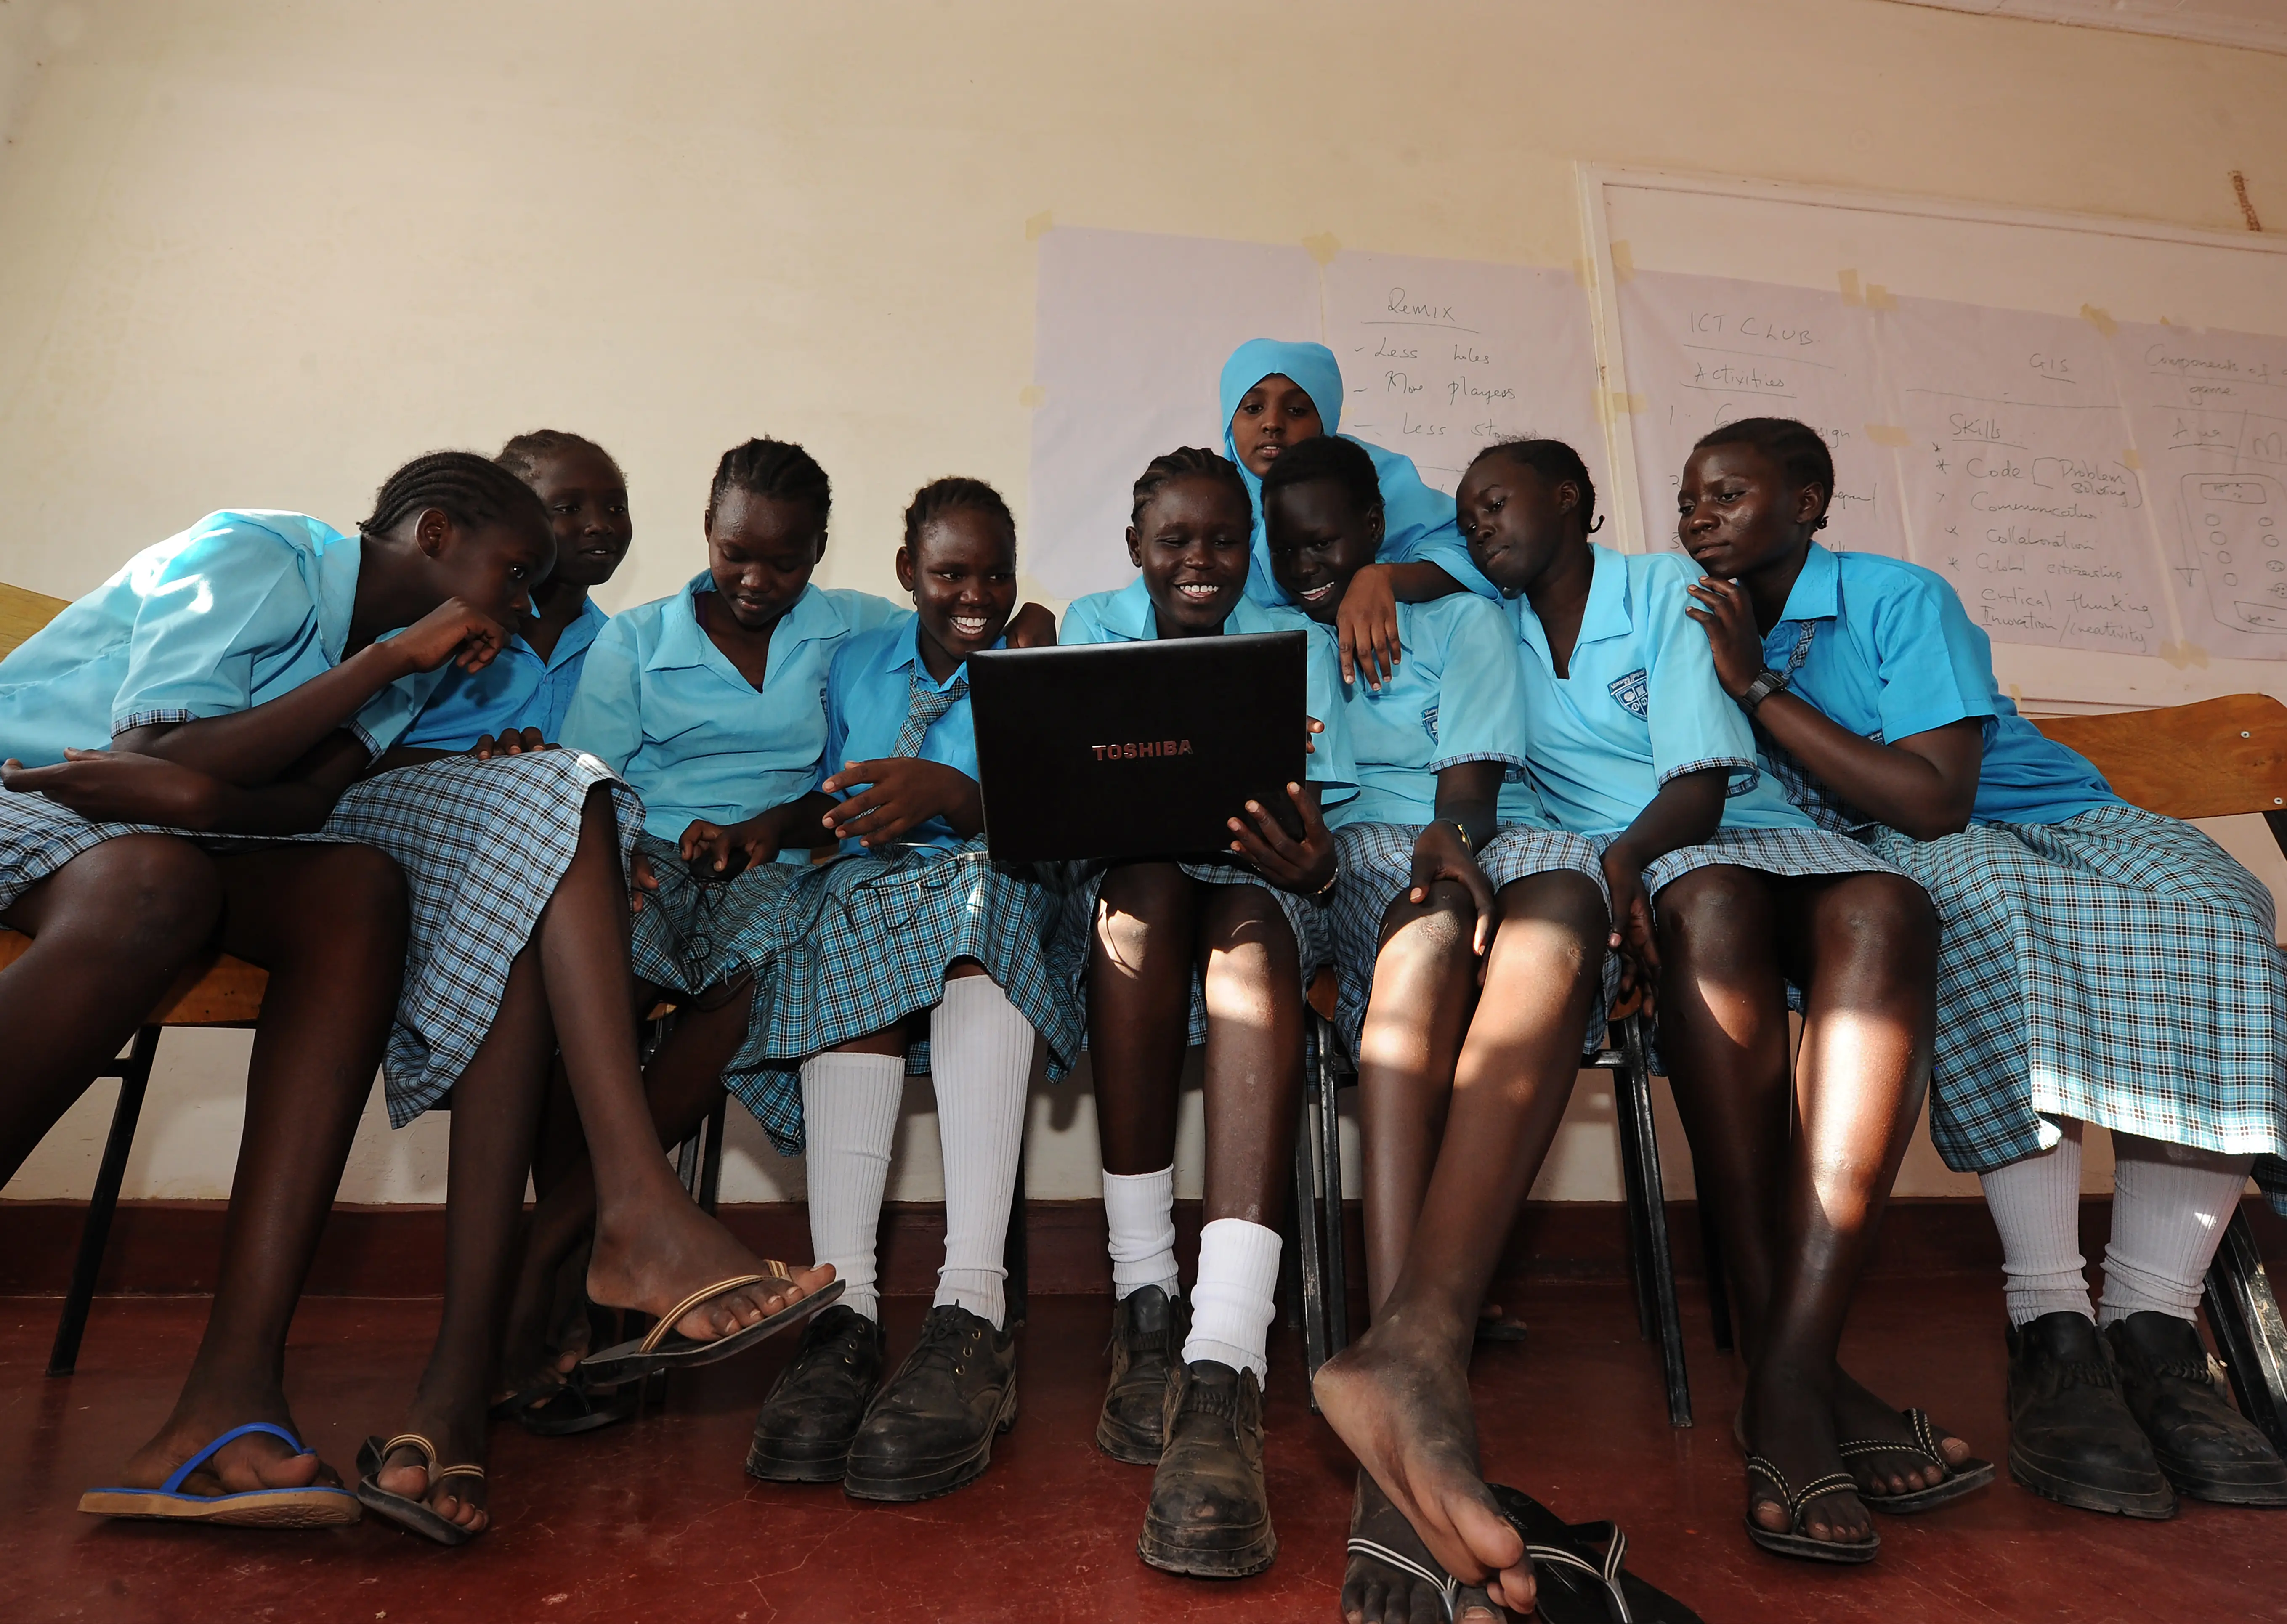 Eighteen-year-old South Sudan refugee Esther Nyakong (C) and fellow students at the Morneau Shepell boarding school for girls study computer literacy in 2016. Esther reached the nearby Kakuma refugee complex in northwest Kenya after fleeing her home with her mother and two sisters in 2008 and hopes to eventually attend university though less than 1% of refugee students reach higher education. ; The Kakuma refugee camp in northwest Kenya was established in 1992 to house thousands of refugees fleeing civil war in neighboring Sudan. By 2016 the population had swelled to nearly 190,000 and included civilians from South Sudan, Sudan, Burundi, Ethiopia, the Democratic Republic of Congo, Eritrea, Uganda and Rwanda. 